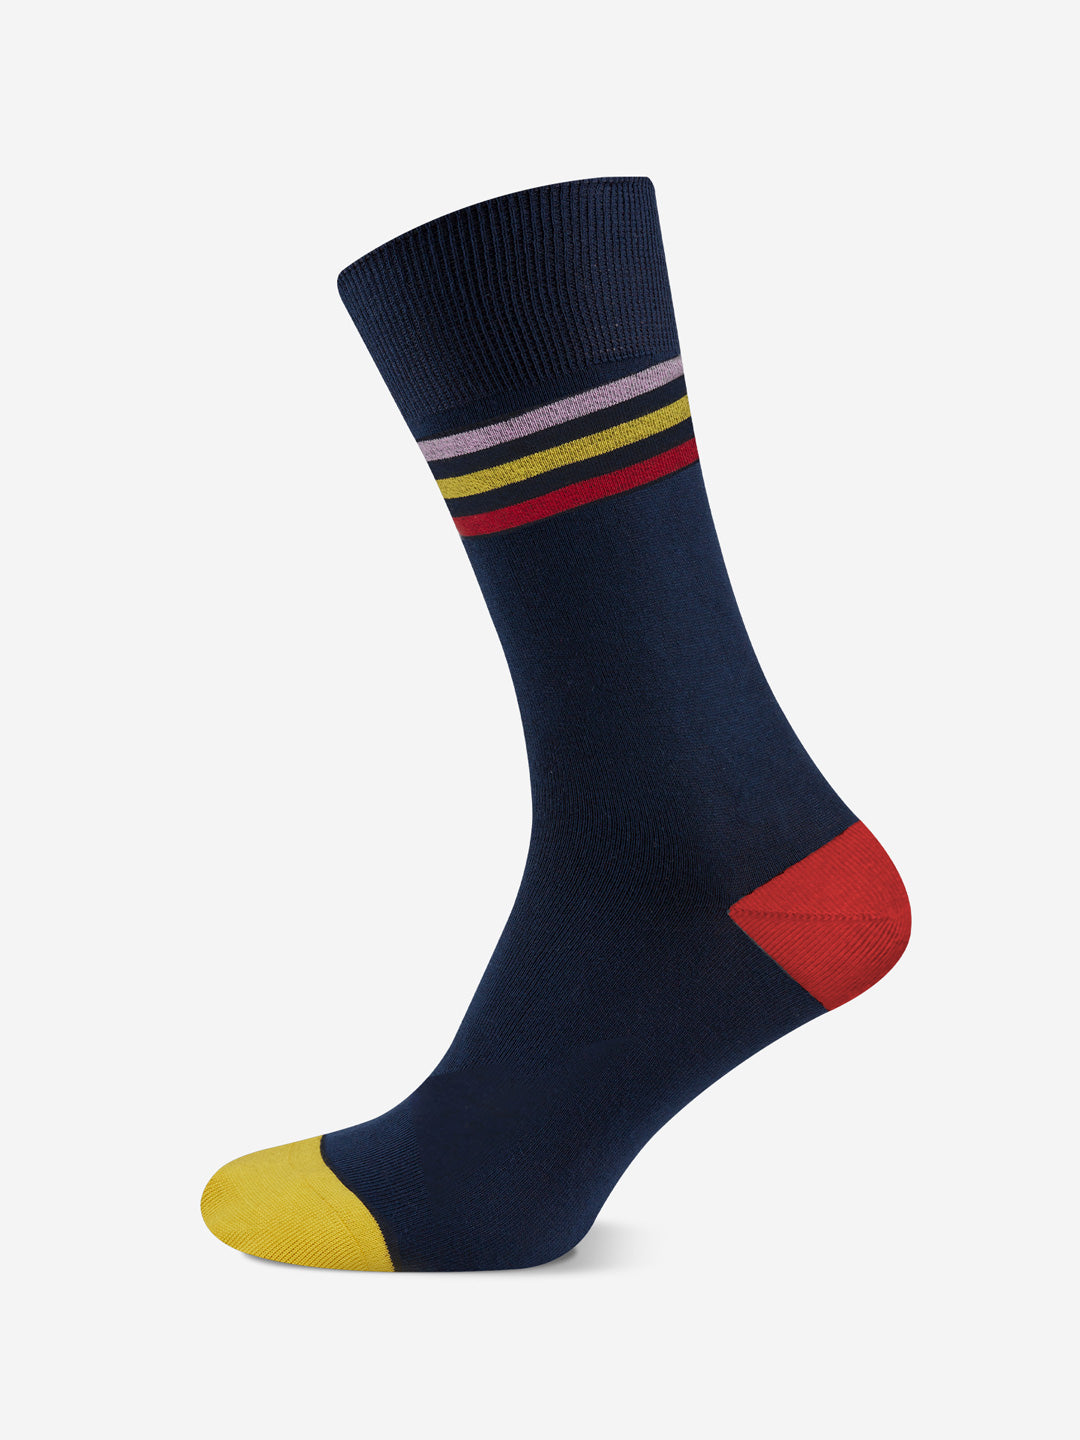 Grand Tours - Trilogy - Casual Socks